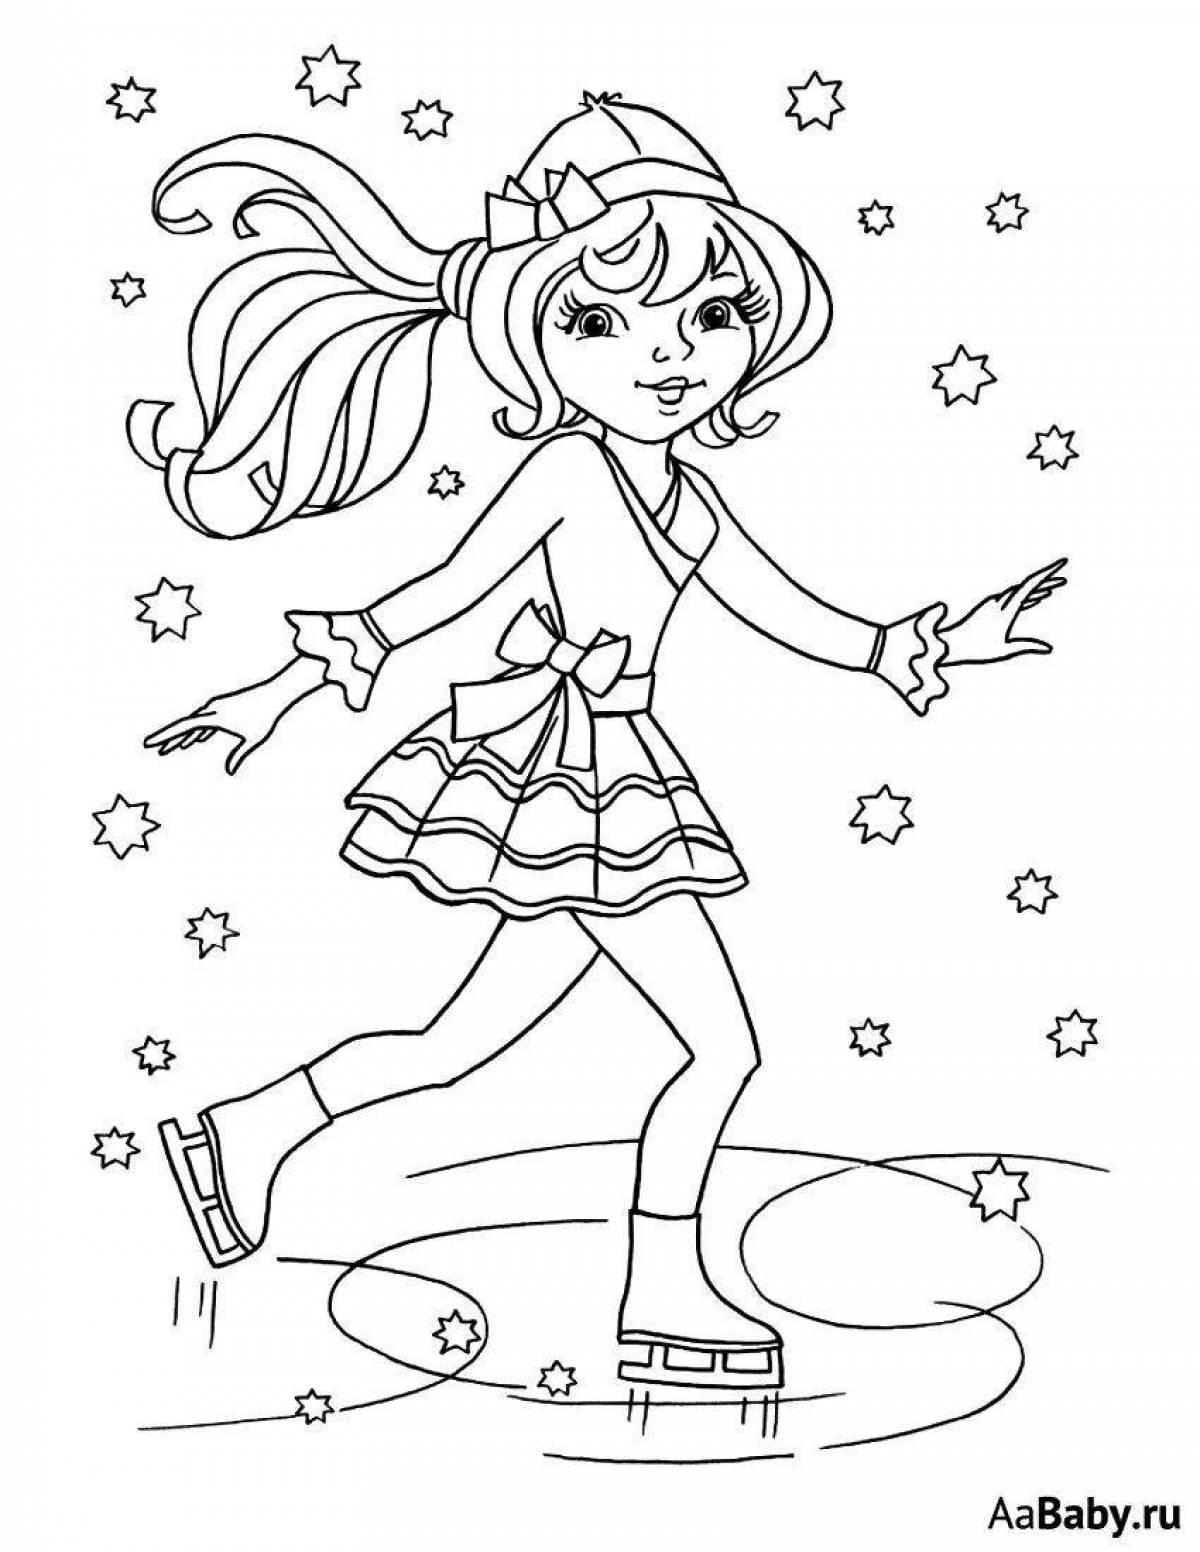 Exciting coloring book for kids on skates